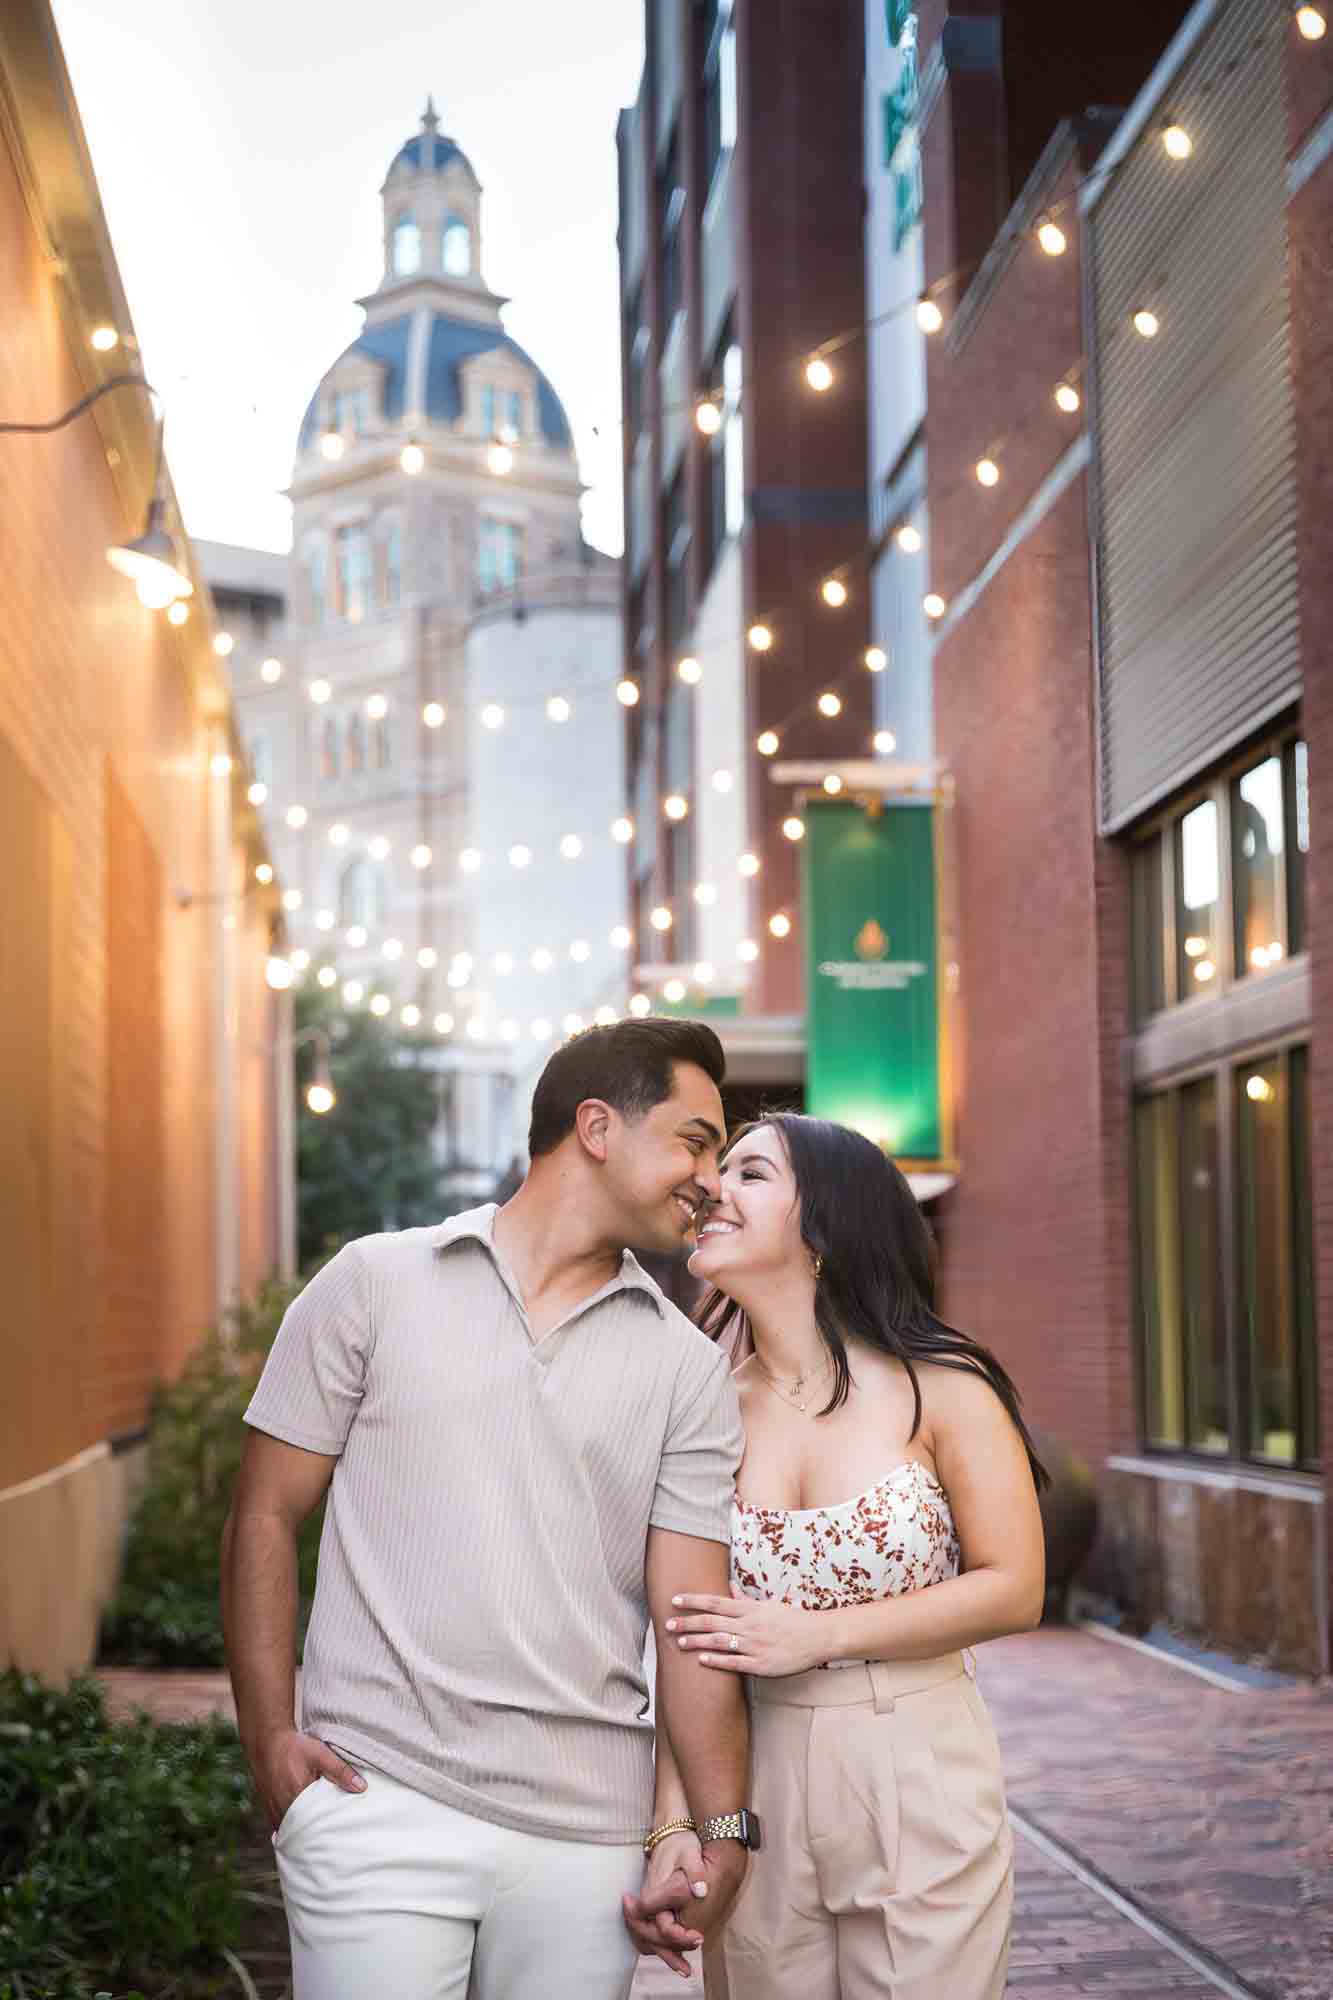 Couple hugging in alleyway lit by fairy lights for an article on how to propose at the Pearl